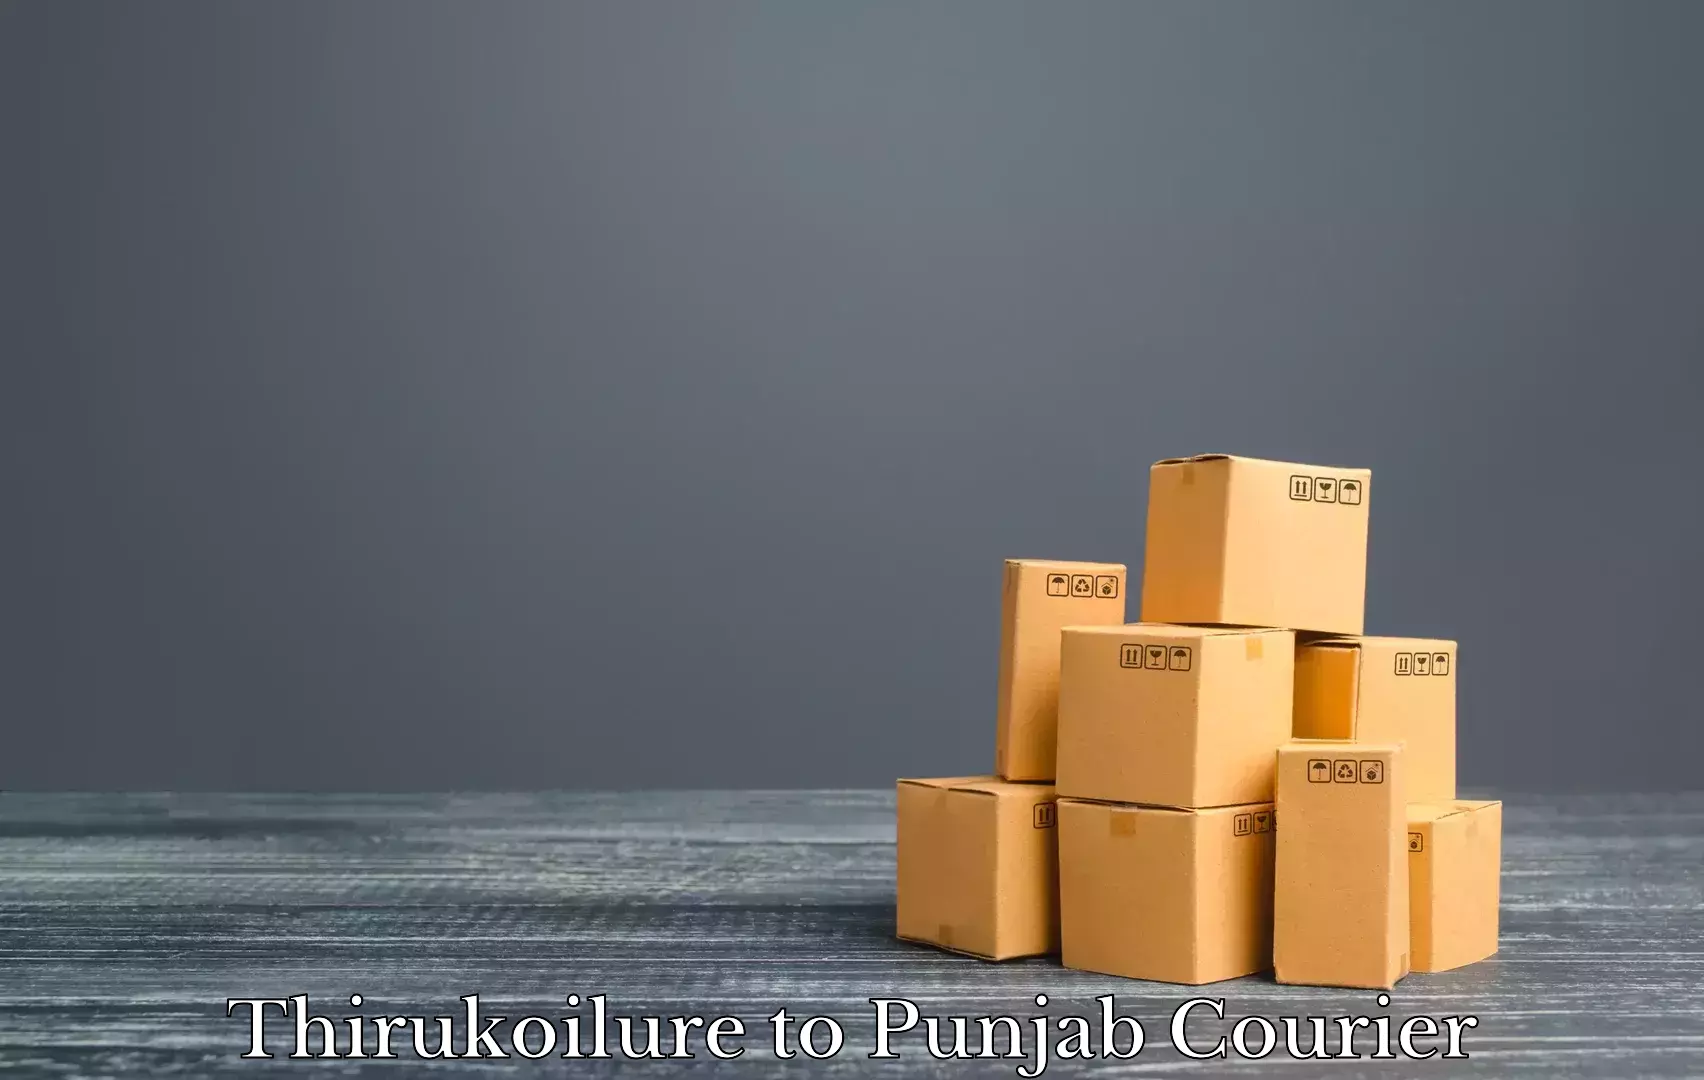 Household moving experts Thirukoilure to Mohali